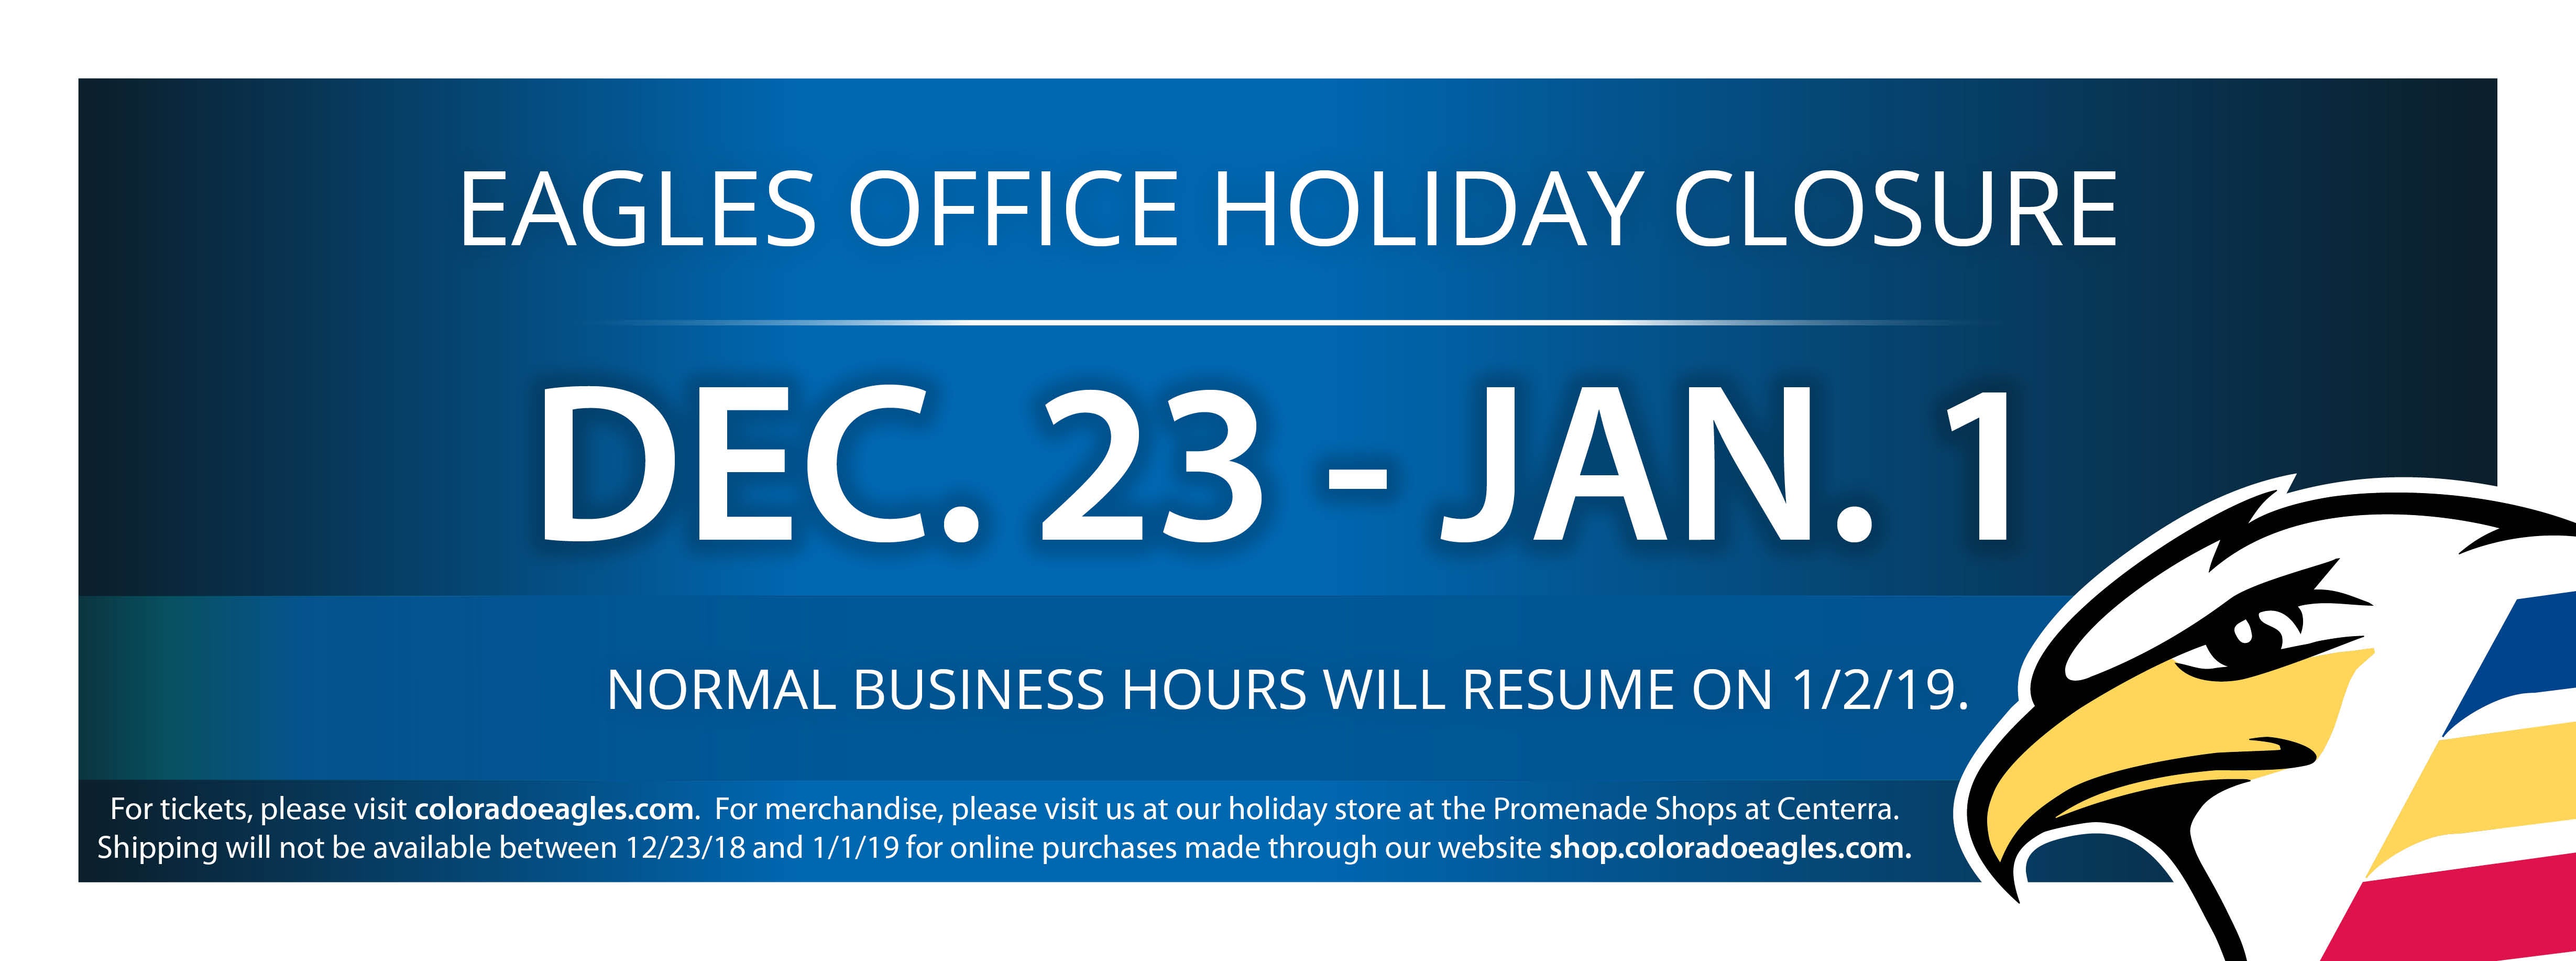 Eagles Office Holiday Closure